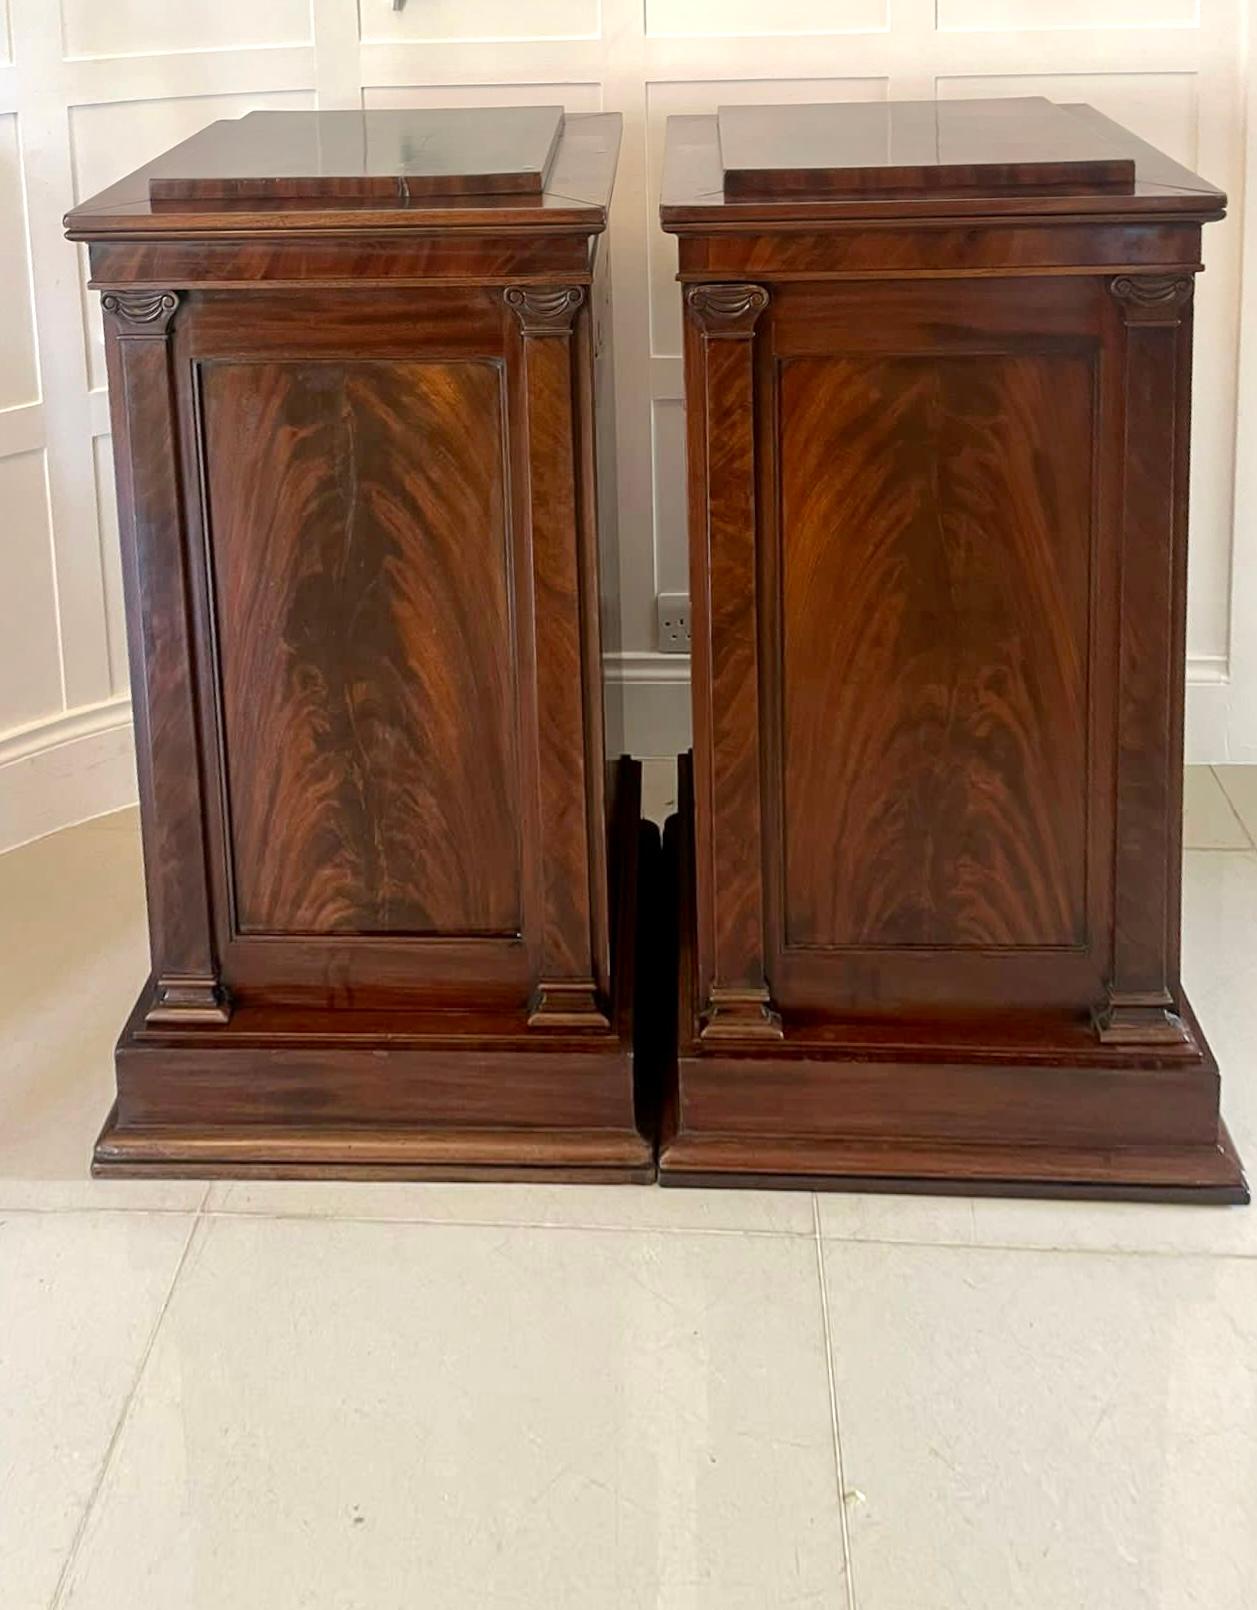 Pair of antique William IV quality figured mahogany pedestal cupboards having a quality figured mahogany stepped top above a figured mahogany panelled door opening to reveal a fitted interior consisting of adjustable shelves and a large drawer with